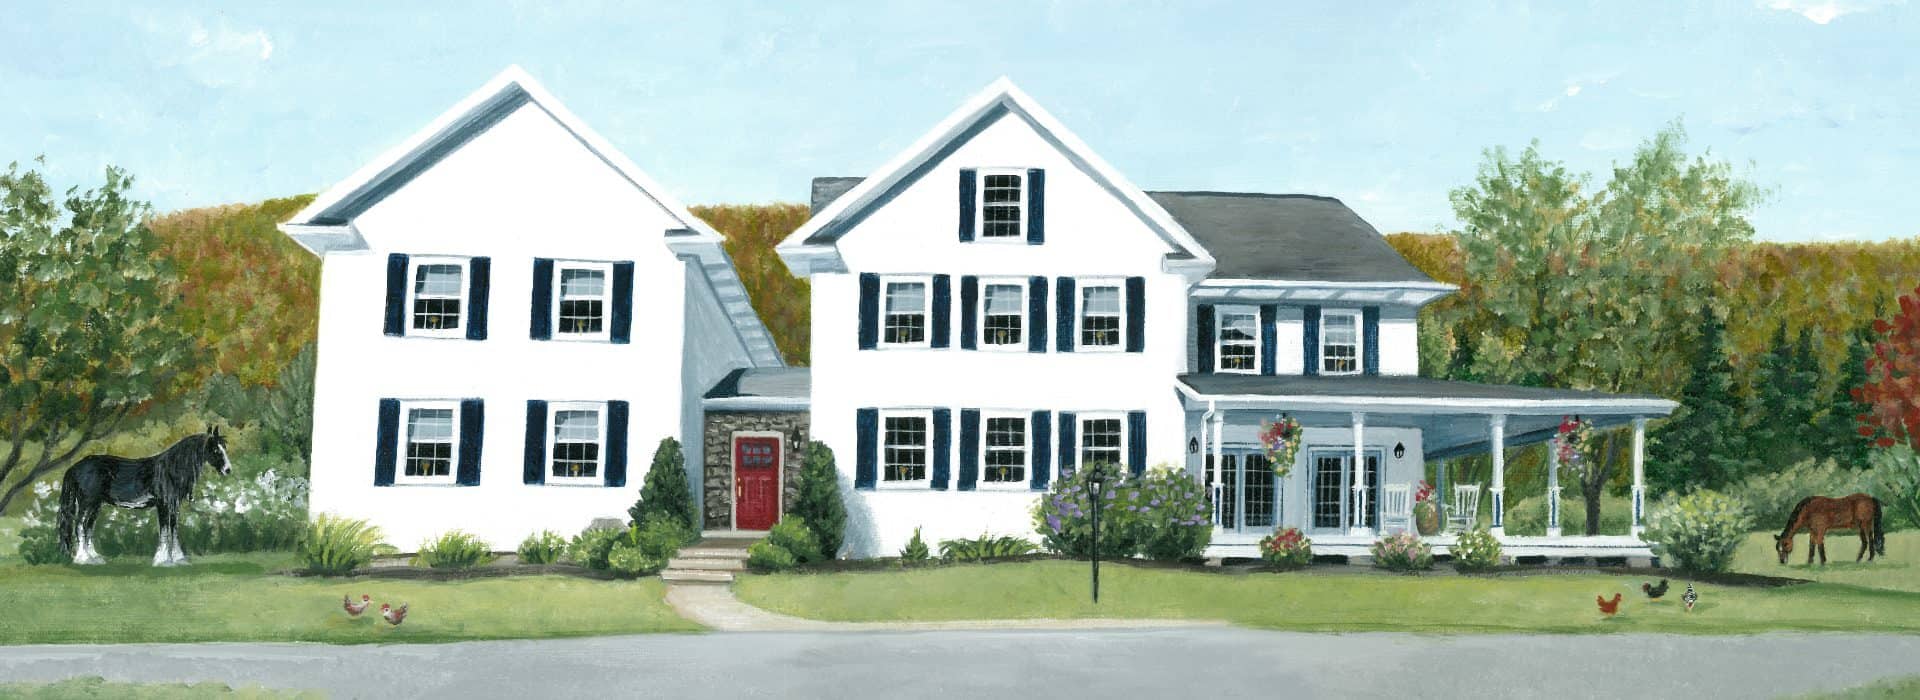 Painted version of the exterior of the property with white siding, navy blue shutters, wrapped porch, and surrounded by trees